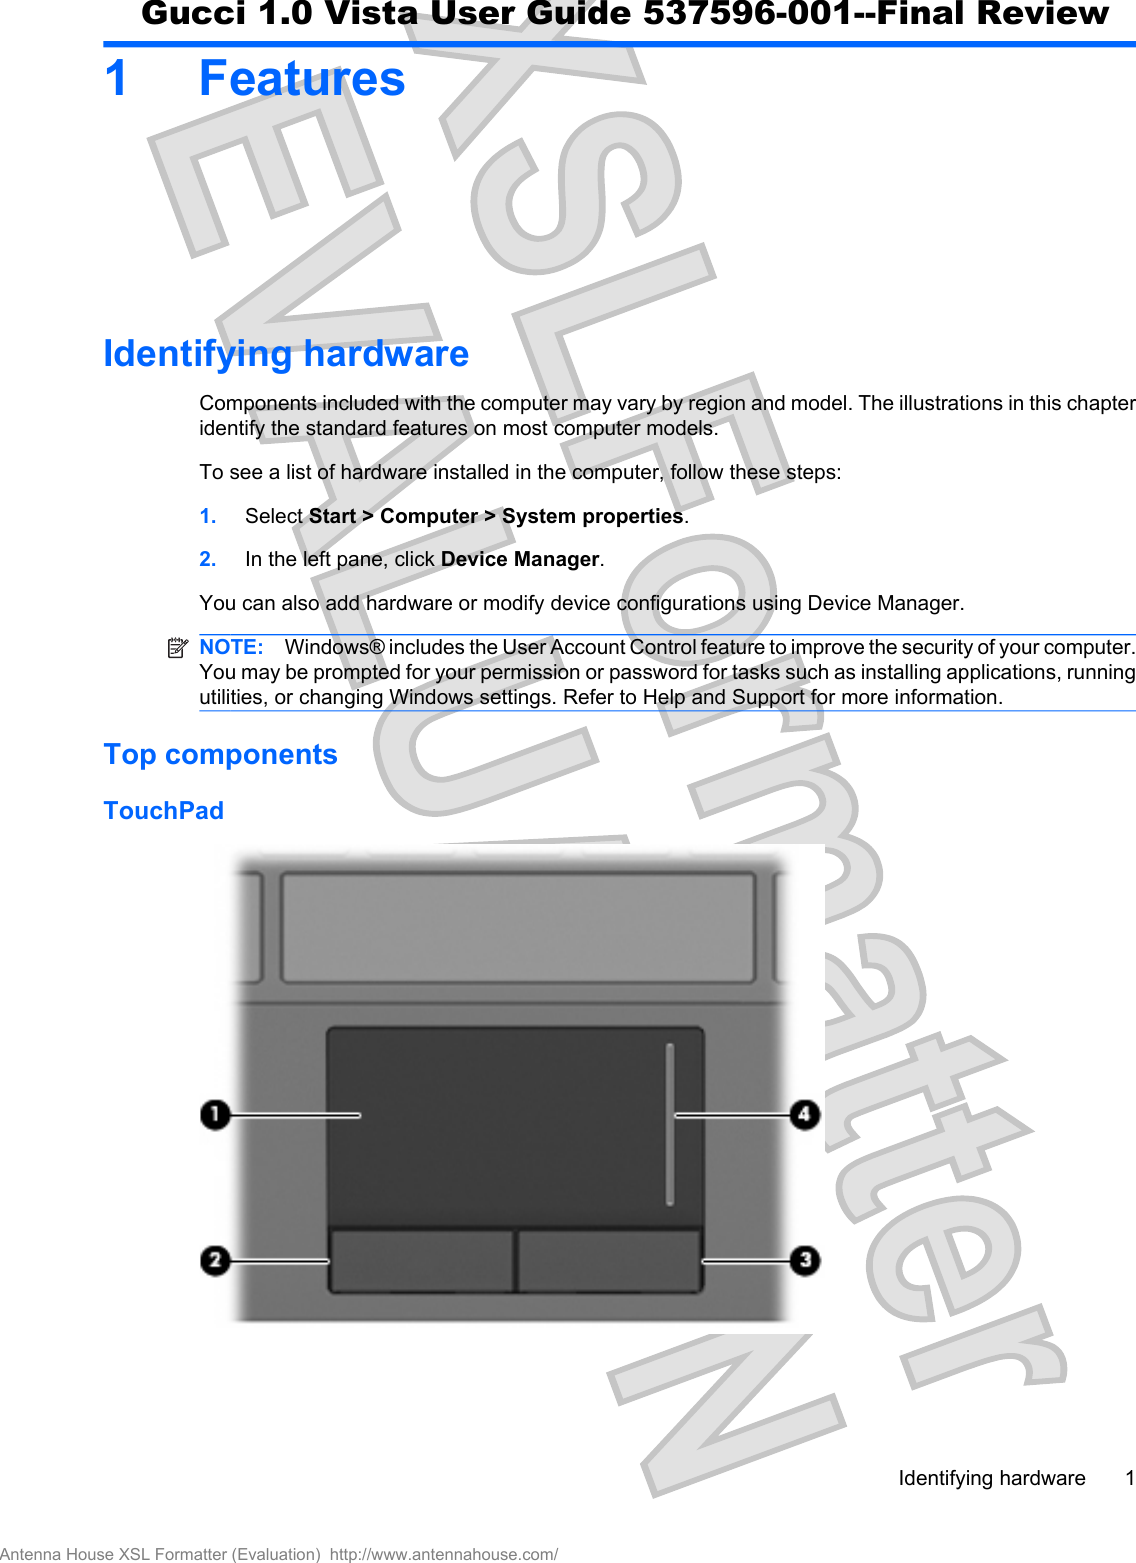 1 FeaturesIdentifying hardwareComponents included with the computer may vary by region and model. The illustrations in this chapteridentify the standard features on most computer models.To see a list of hardware installed in the computer, follow these steps:1. Select Start &gt; Computer &gt; System properties.2. In the left pane, click Device Manager.You can also add hardware or modify device configurations using Device Manager.NOTE: Windows® includes the User Account Control feature to improve the security of your computer.You may be prompted for your permission or password for tasks such as installing applications, runningutilities, or changing Windows settings. Refer to Help and Support for more information.Top componentsTouchPadIdentifying hardware 1Antenna House XSL Formatter (Evaluation)  http://www.antennahouse.com/Gucci 1.0 Vista User Guide 537596-001--Final Review